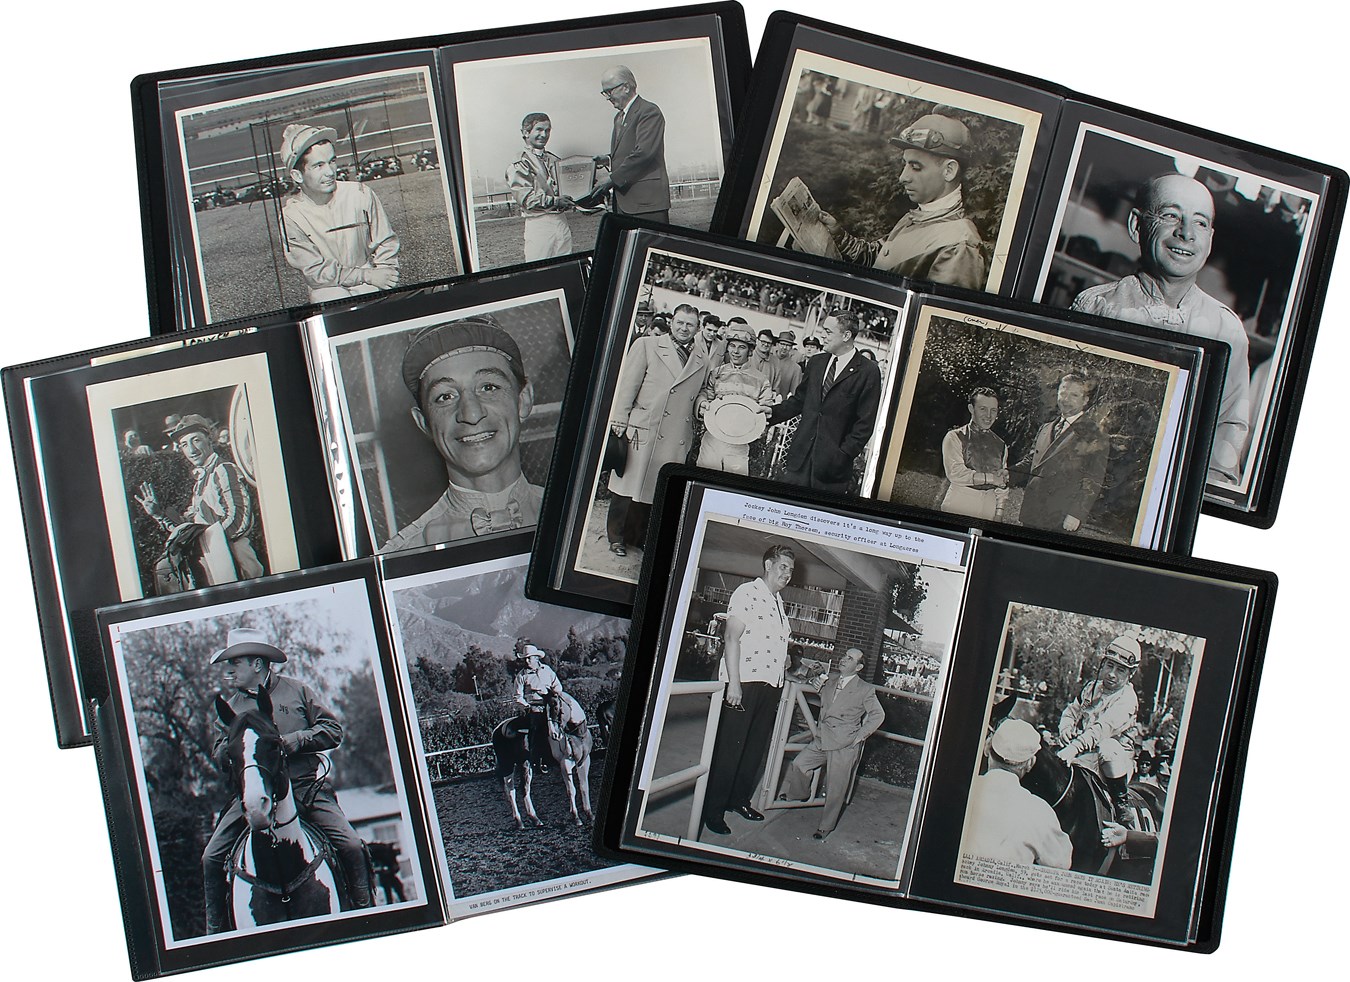 Spectacular Collection of Horse Racing Photographs of Hall of Fame Jockey & Trainers (193) - Several by Bert Morgan